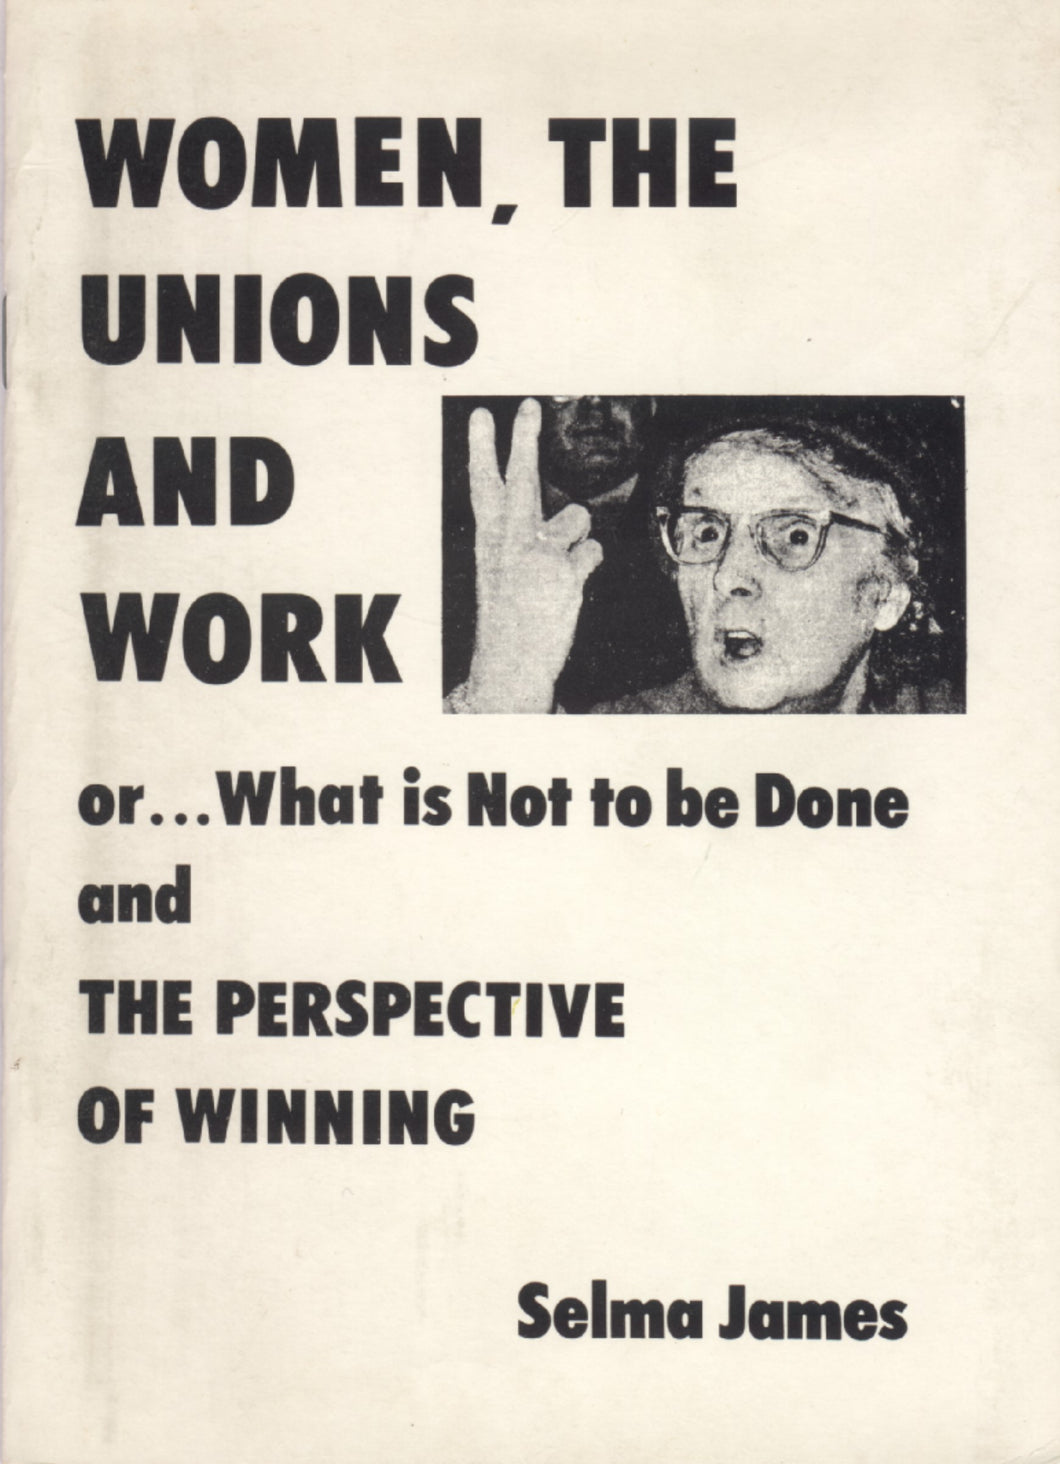 Women the Unions and Work and The Perspective of Winning